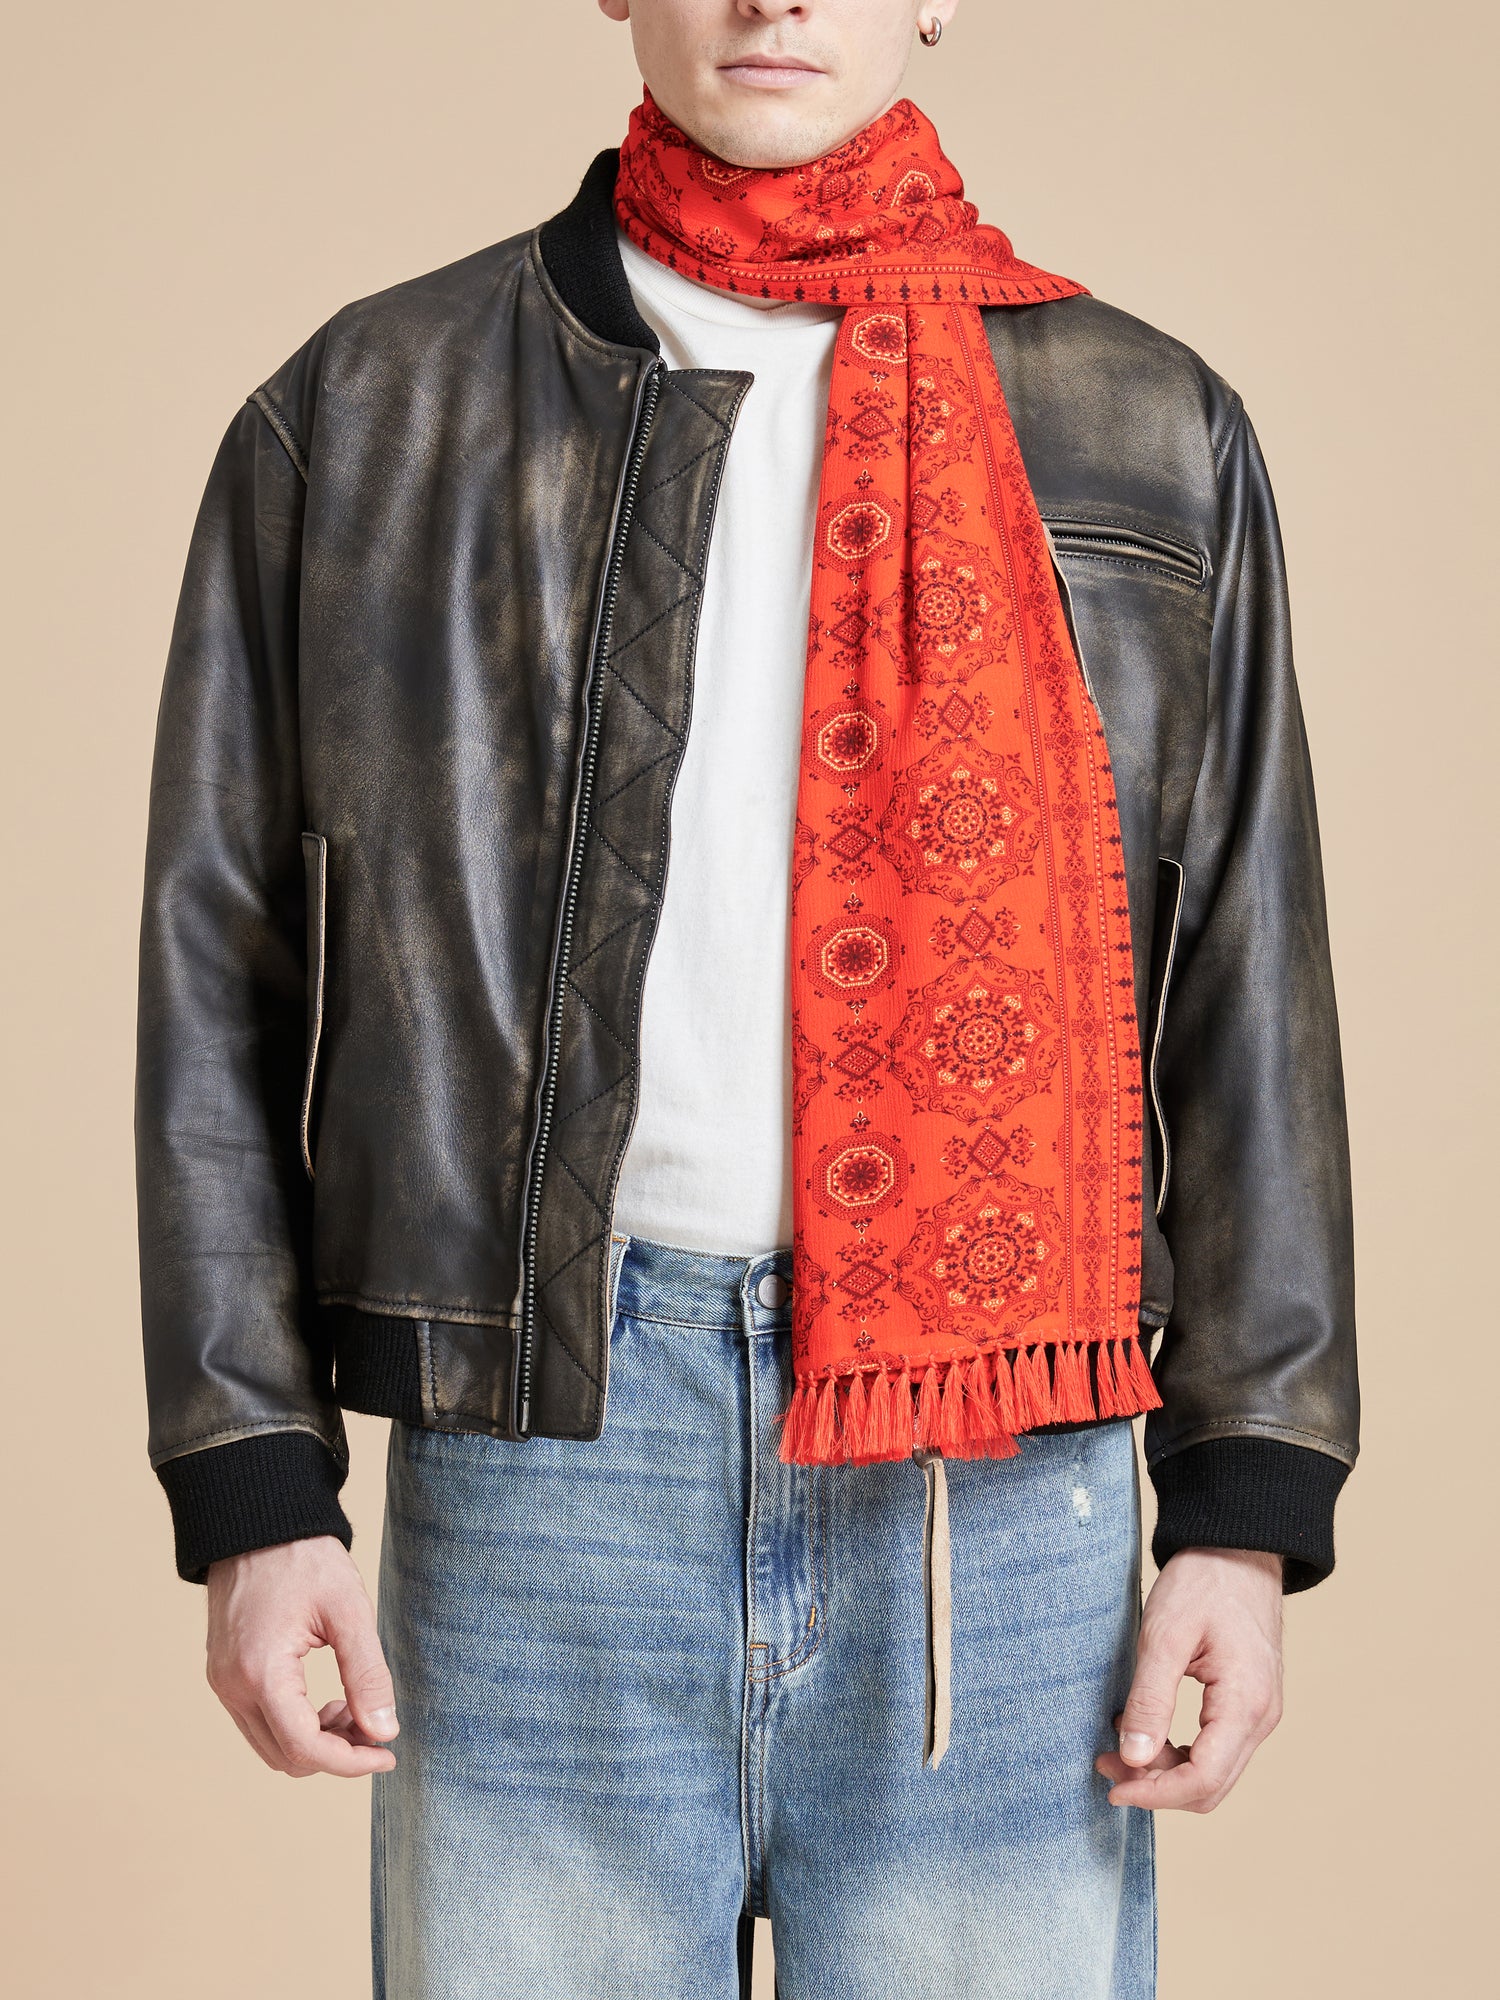 A man wearing a Found Grenadine Scarf and leather jacket.